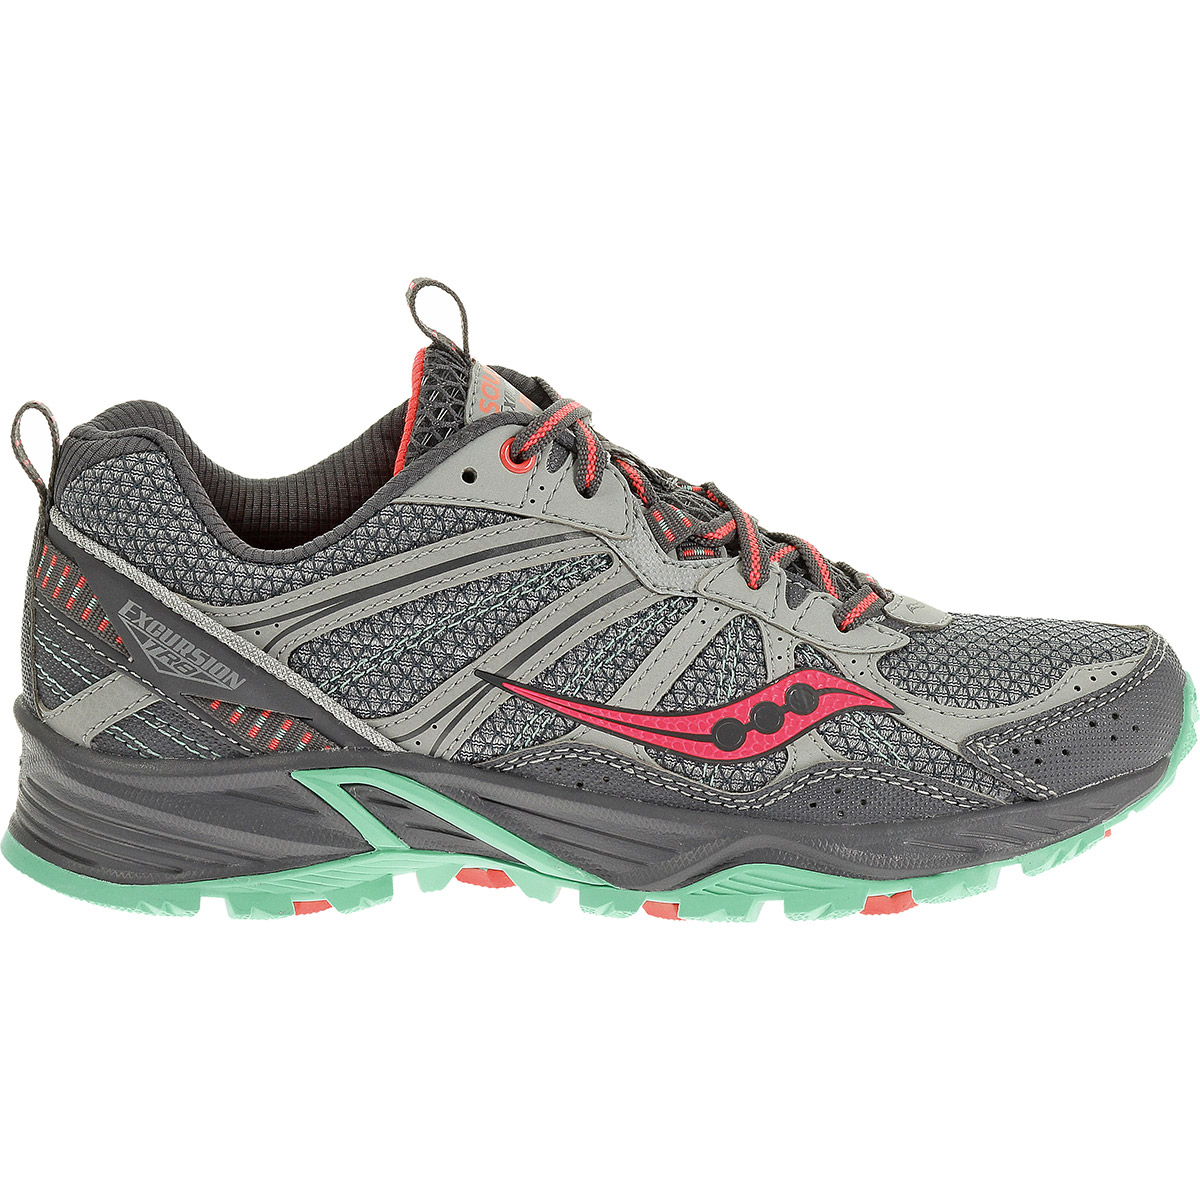 Excursion TR8 Trail Running Shoes 